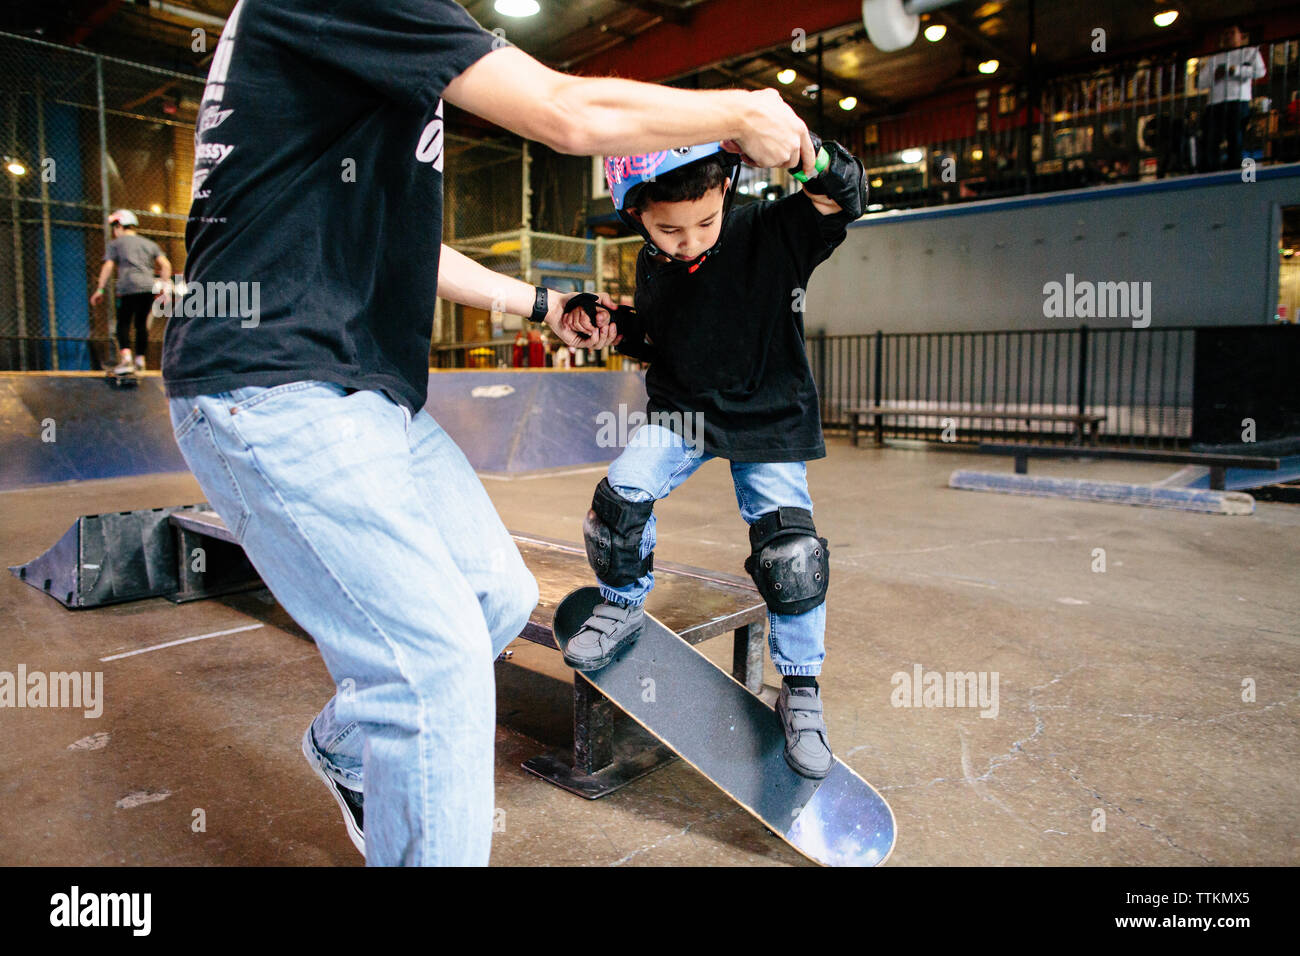 Young boy takes a jump with skateboard while holding teacher's hands Stock  Photo - Alamy